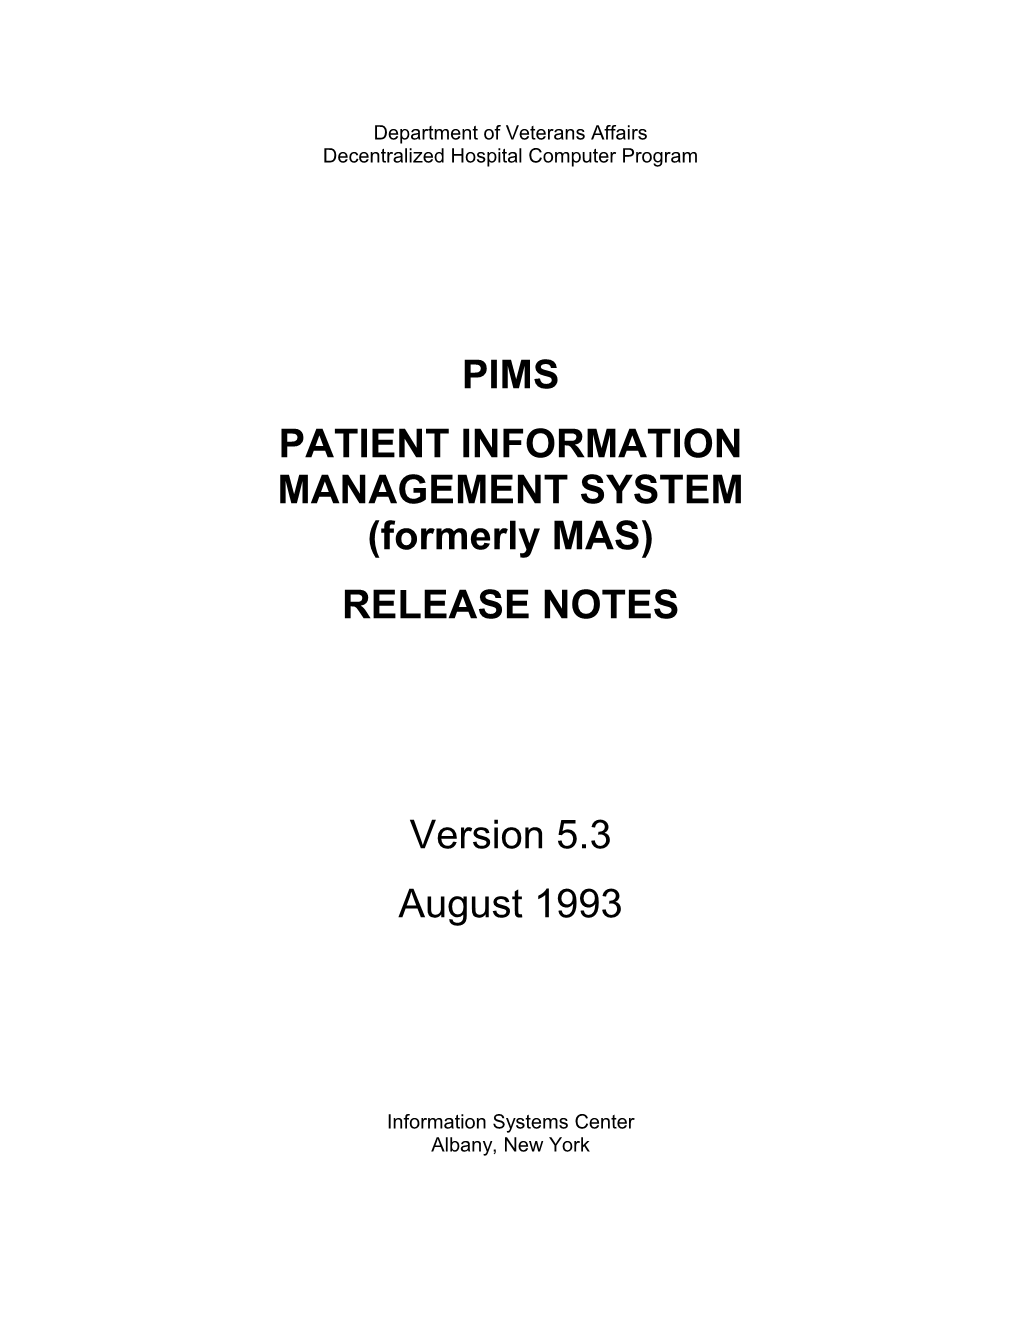 PIMS Install Guide